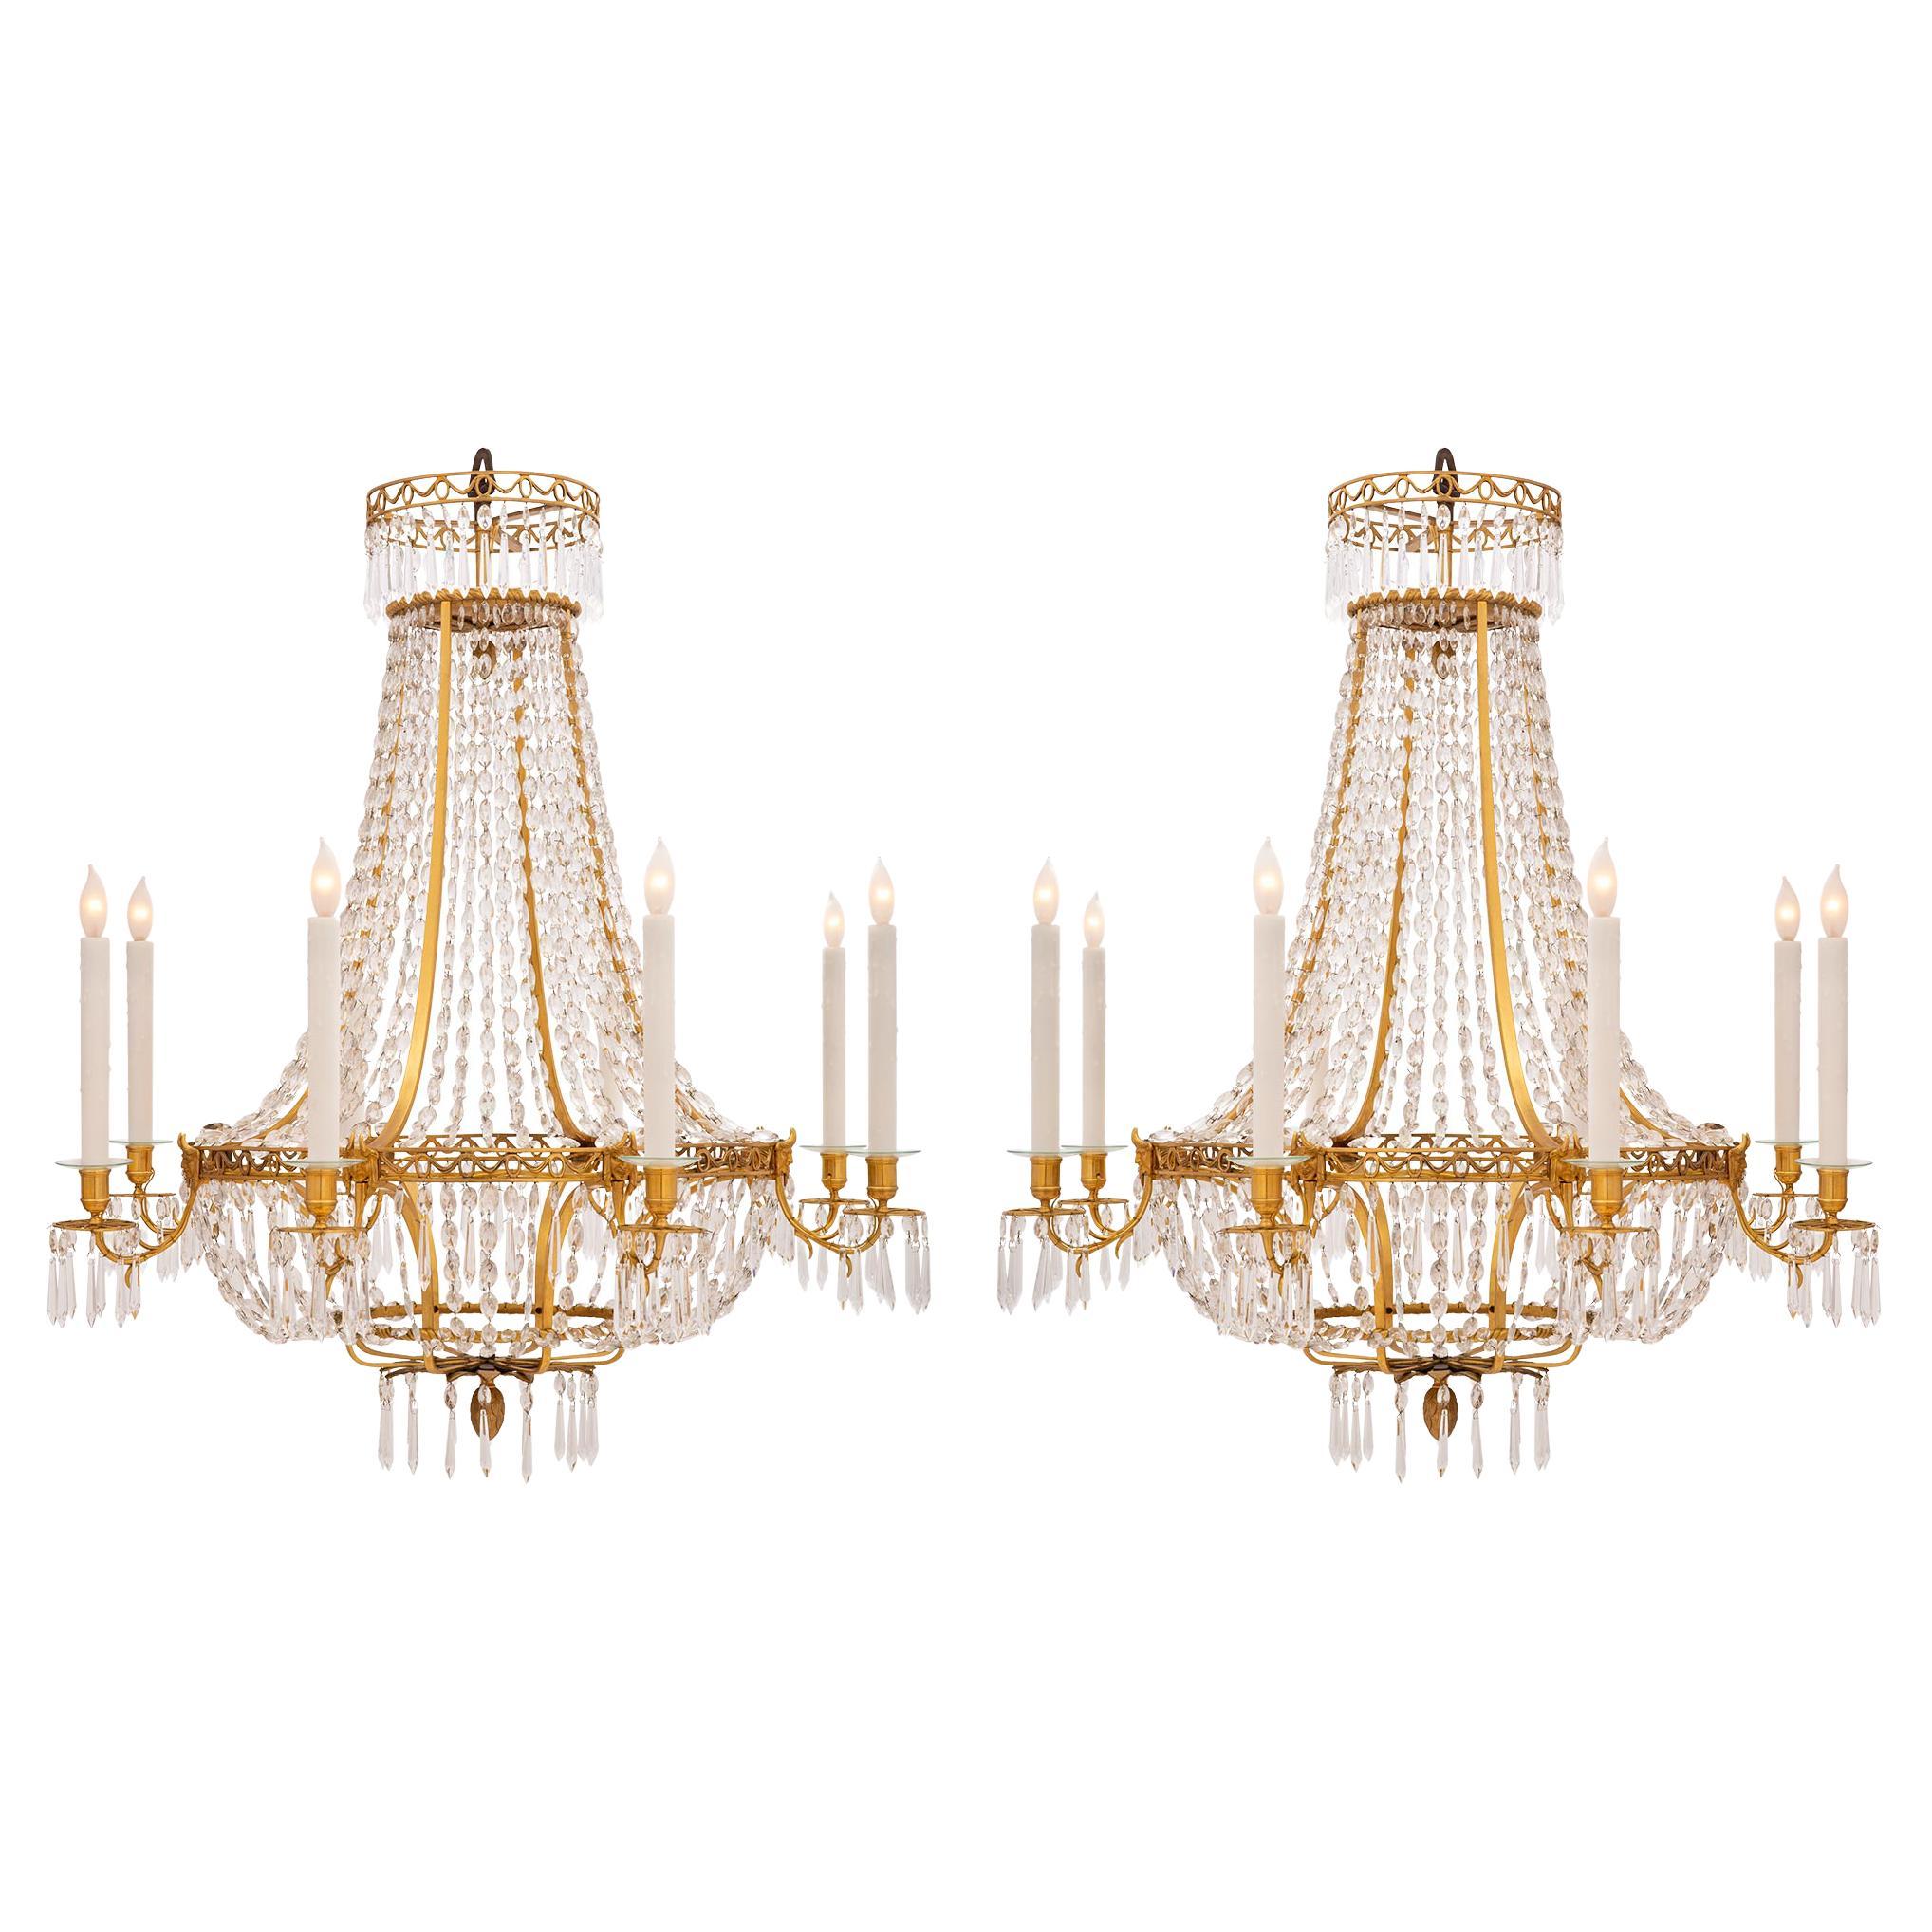 Pair of 19th Century Neoclassical Style Ormolu and Crystal Chandeliers